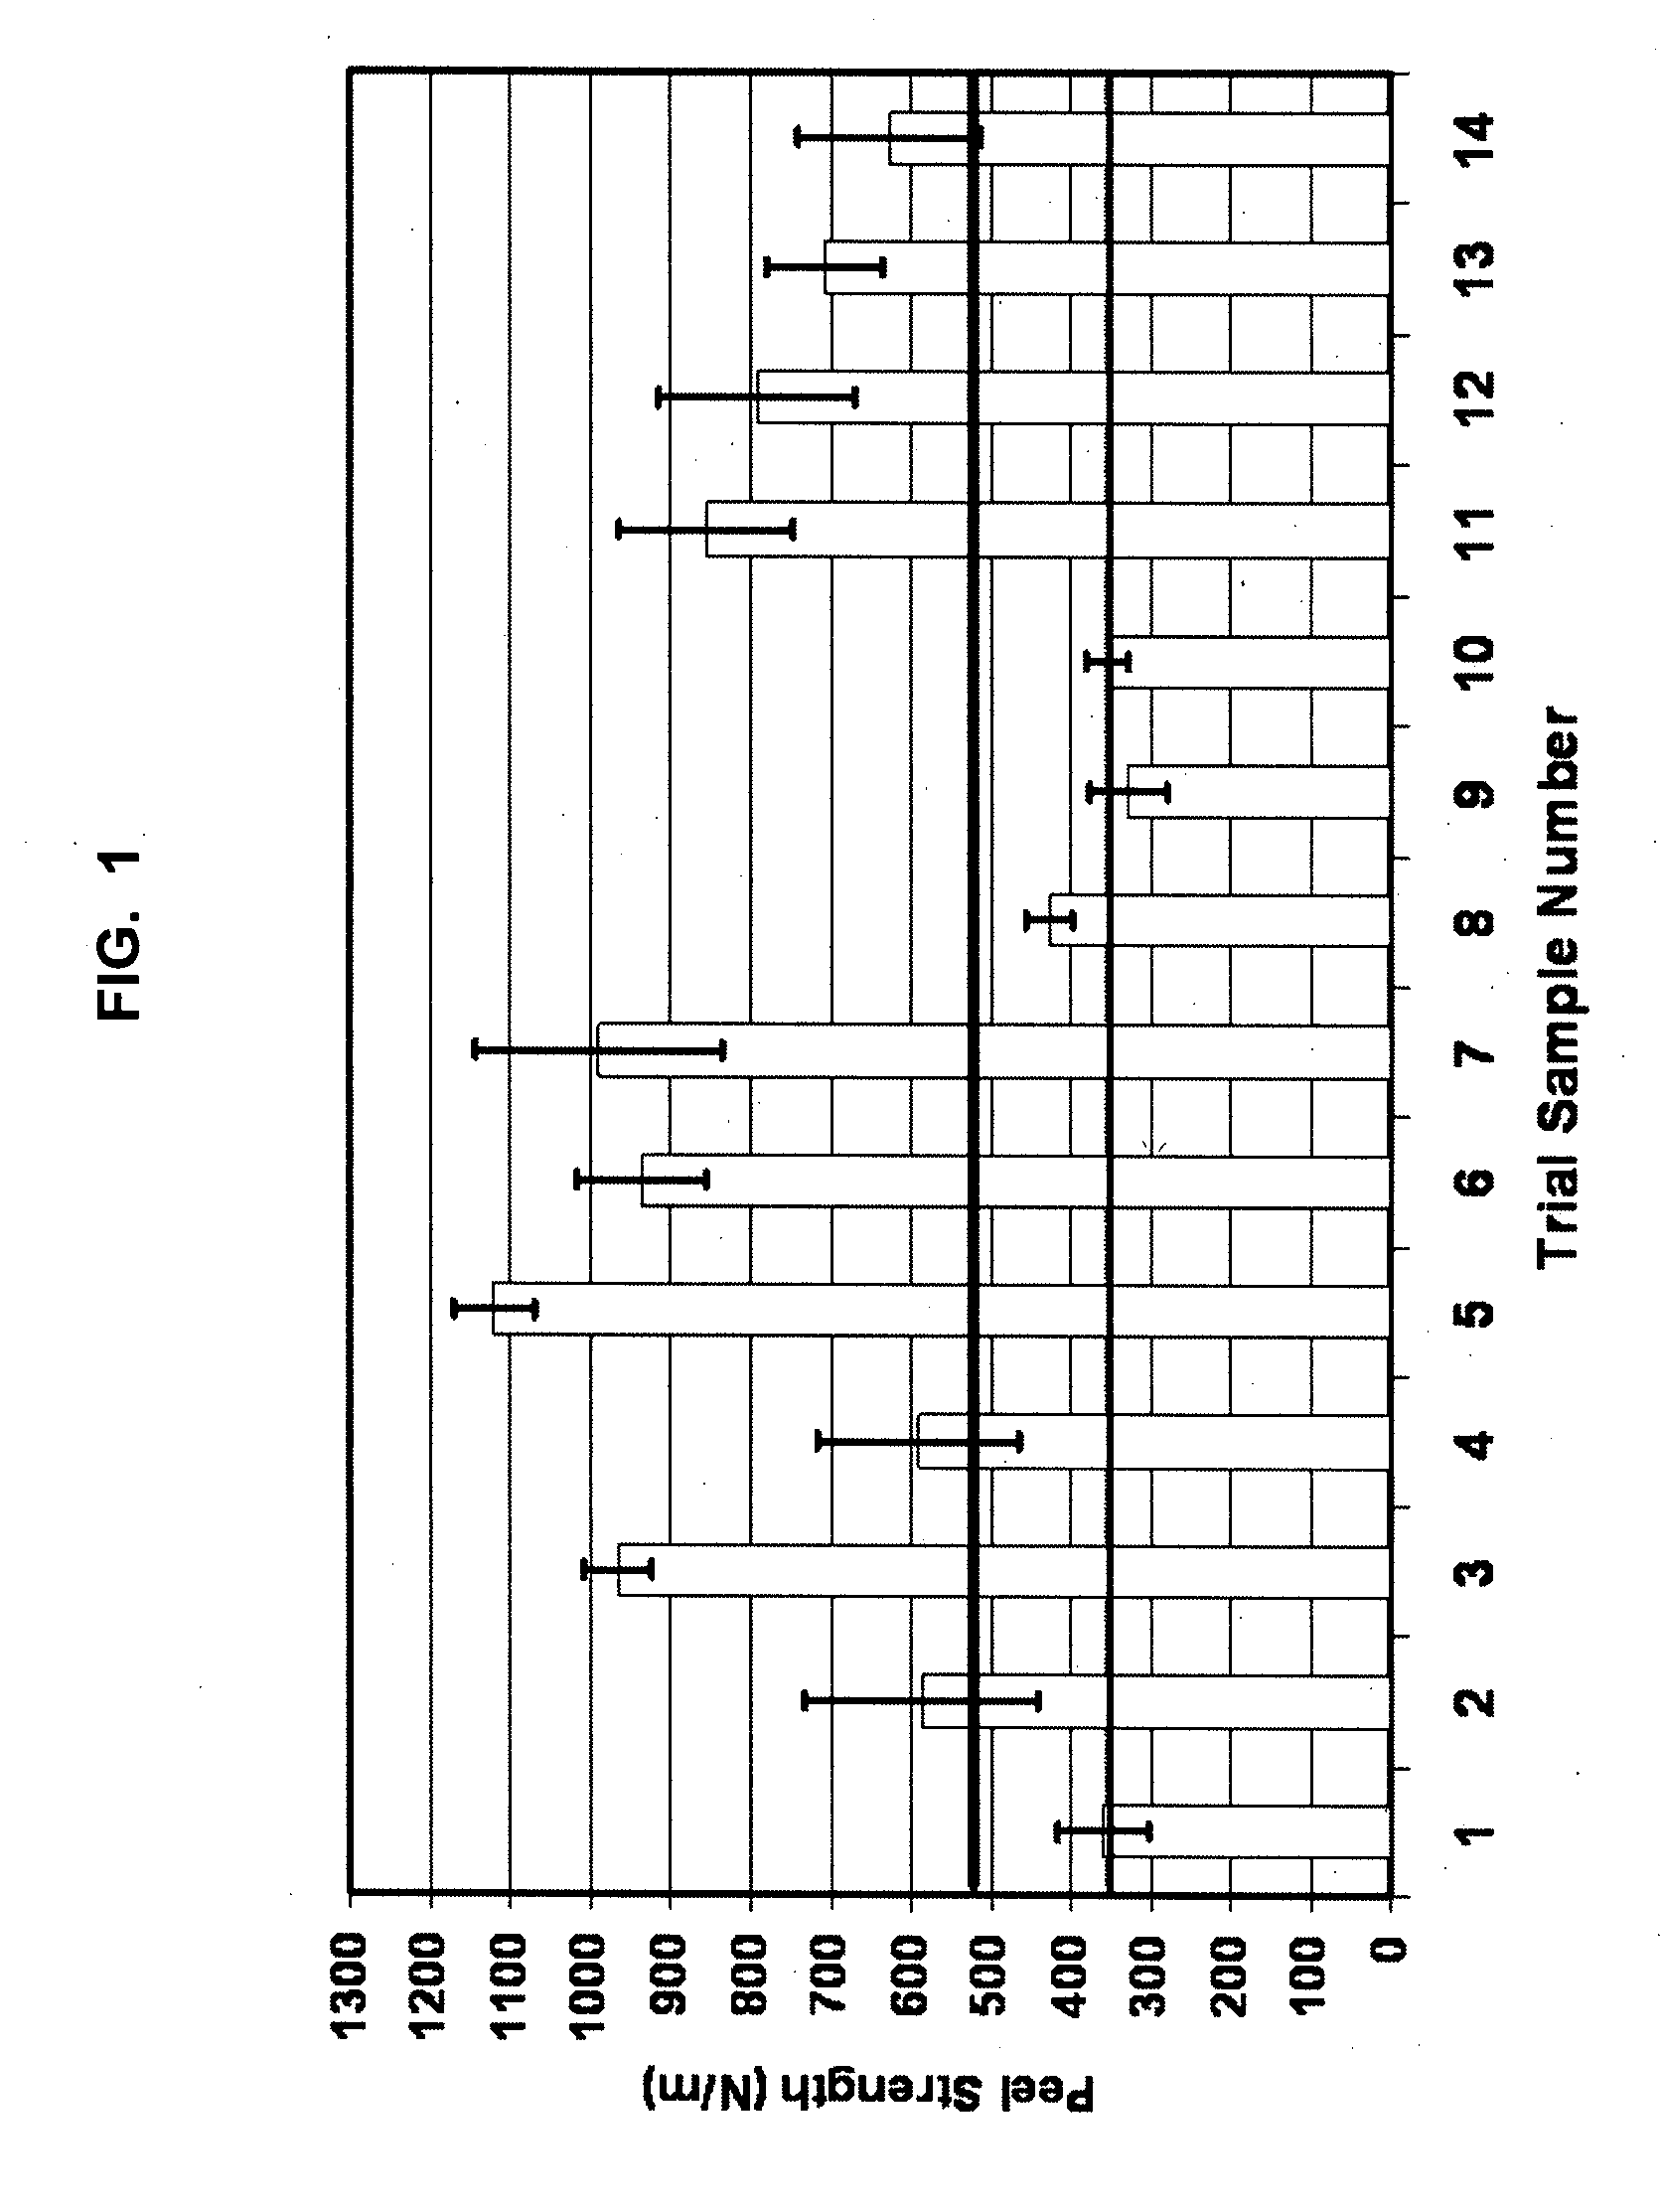 Moldable composite sheet with improved adhesion at elevated service temperatures